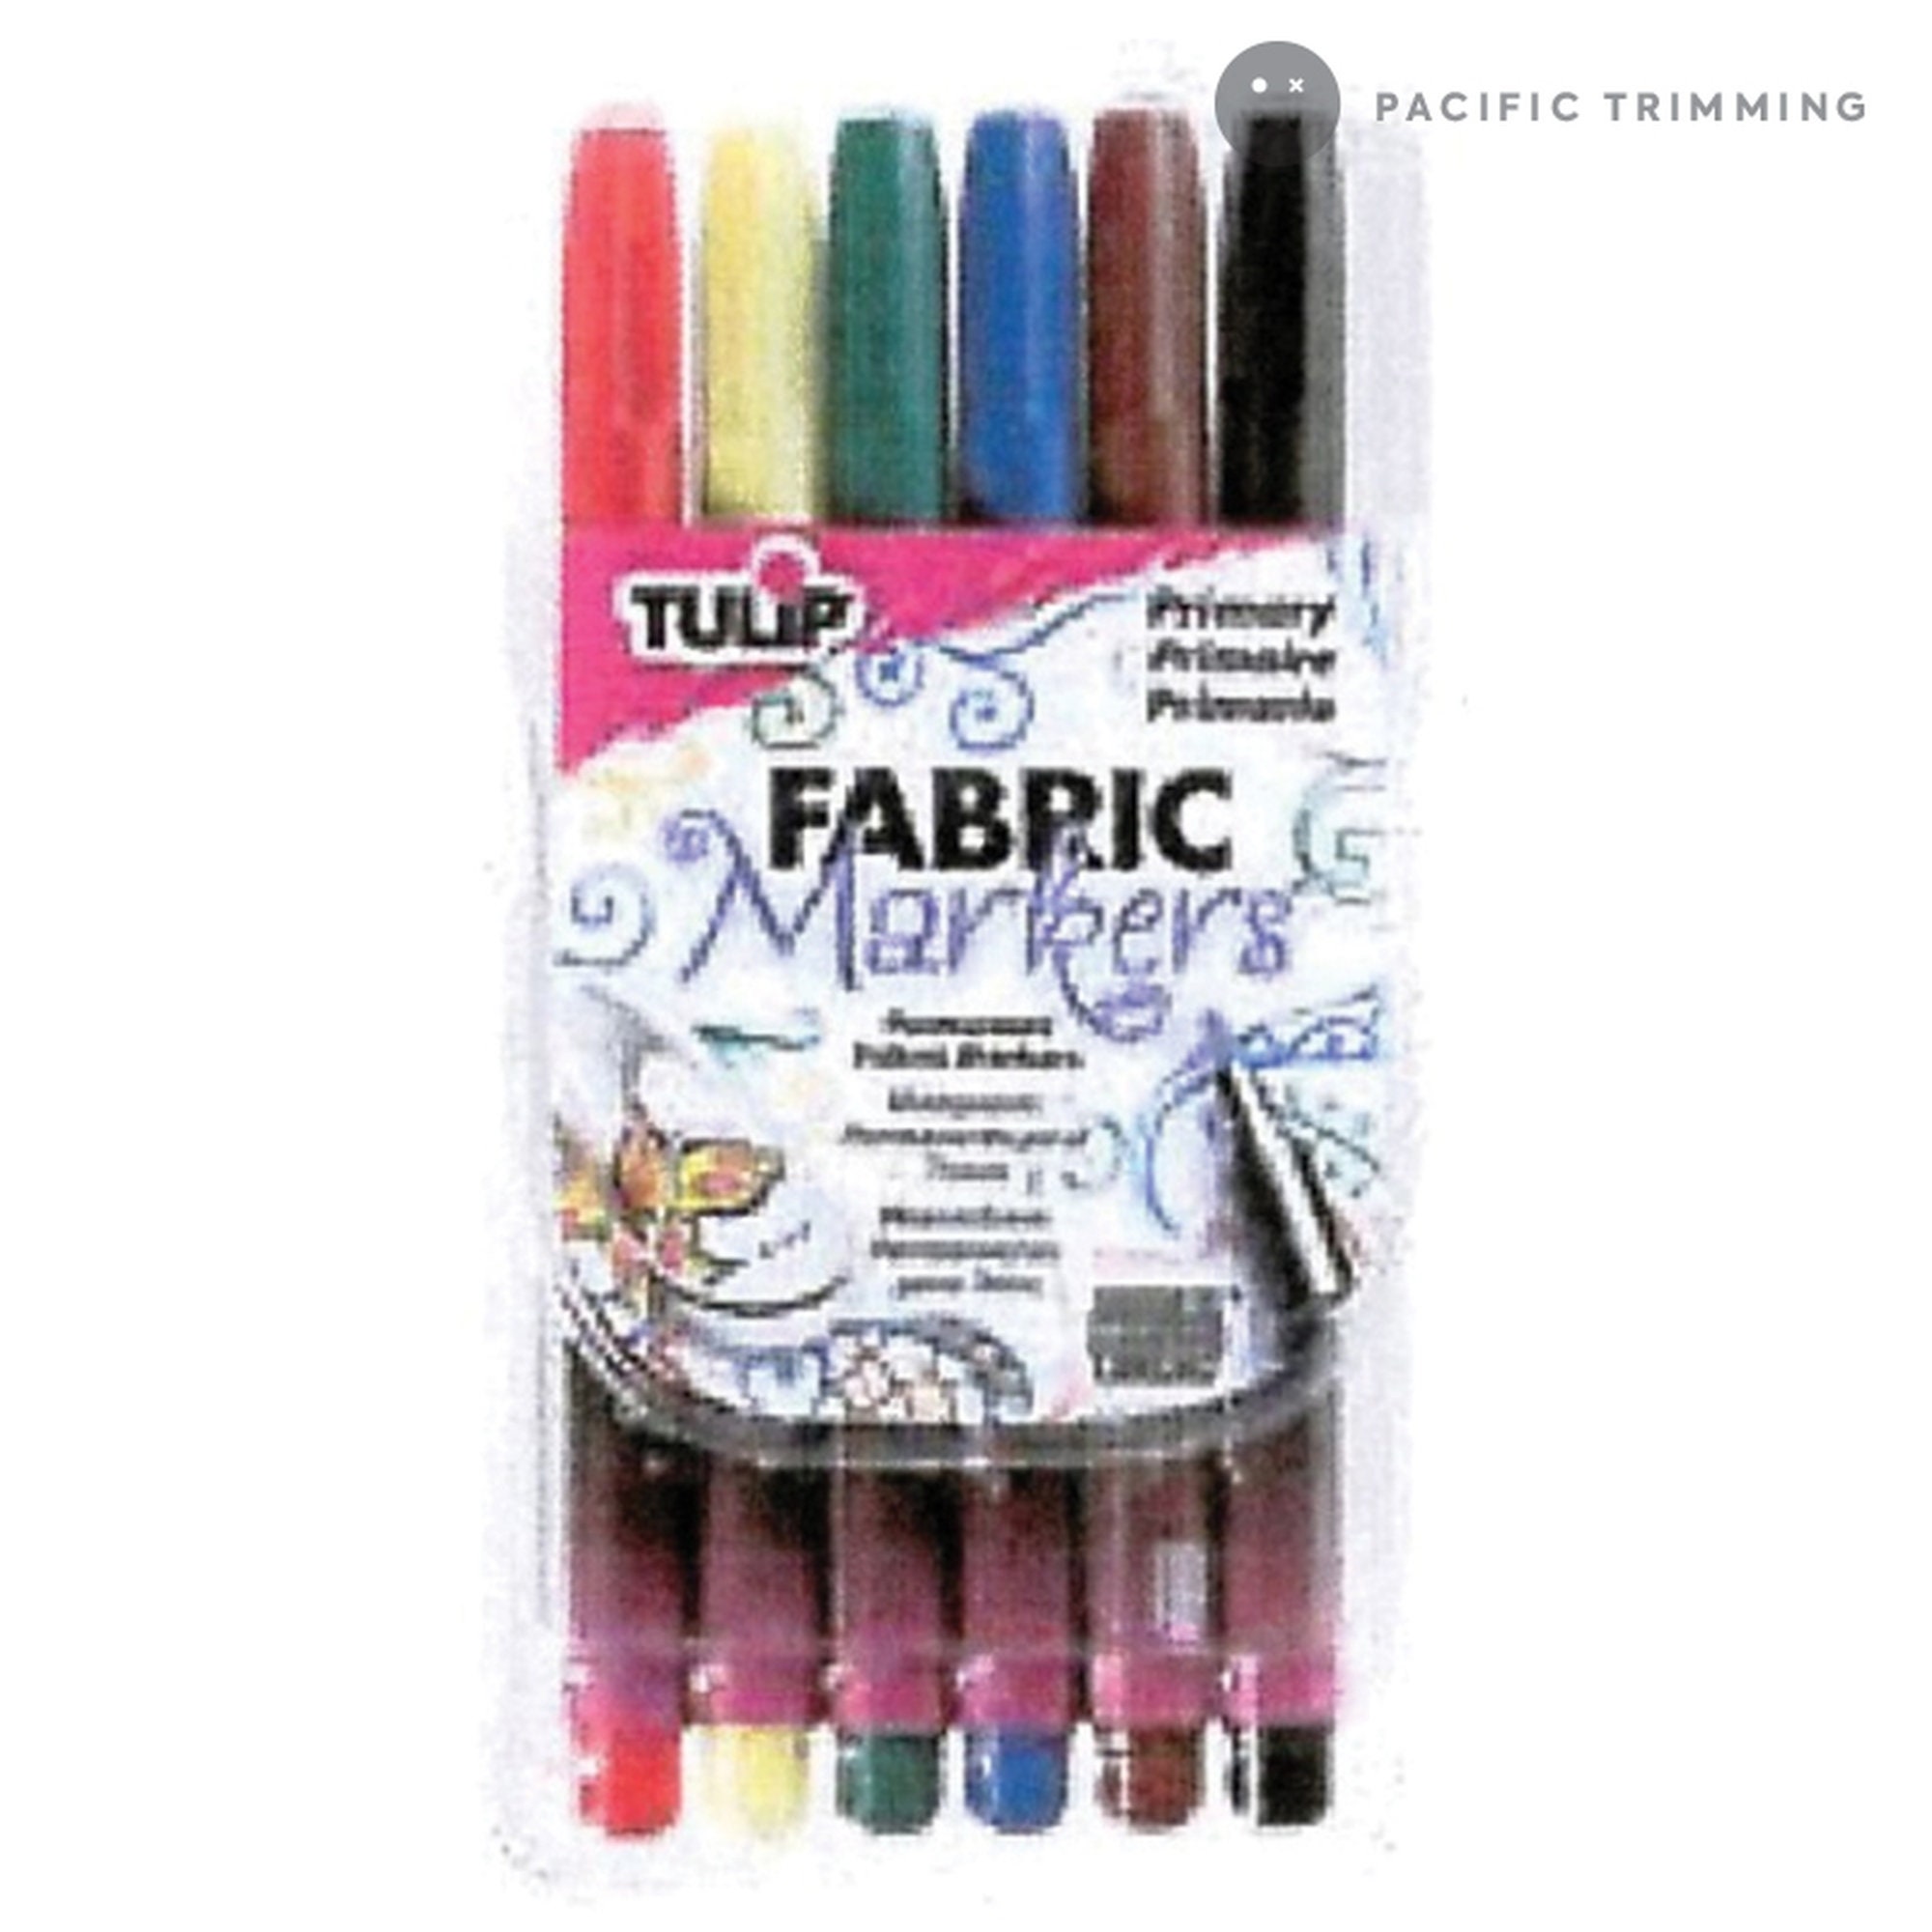 Tinlade 6 Pcs Fabric Markers For Clothes Fabric Paint Markers